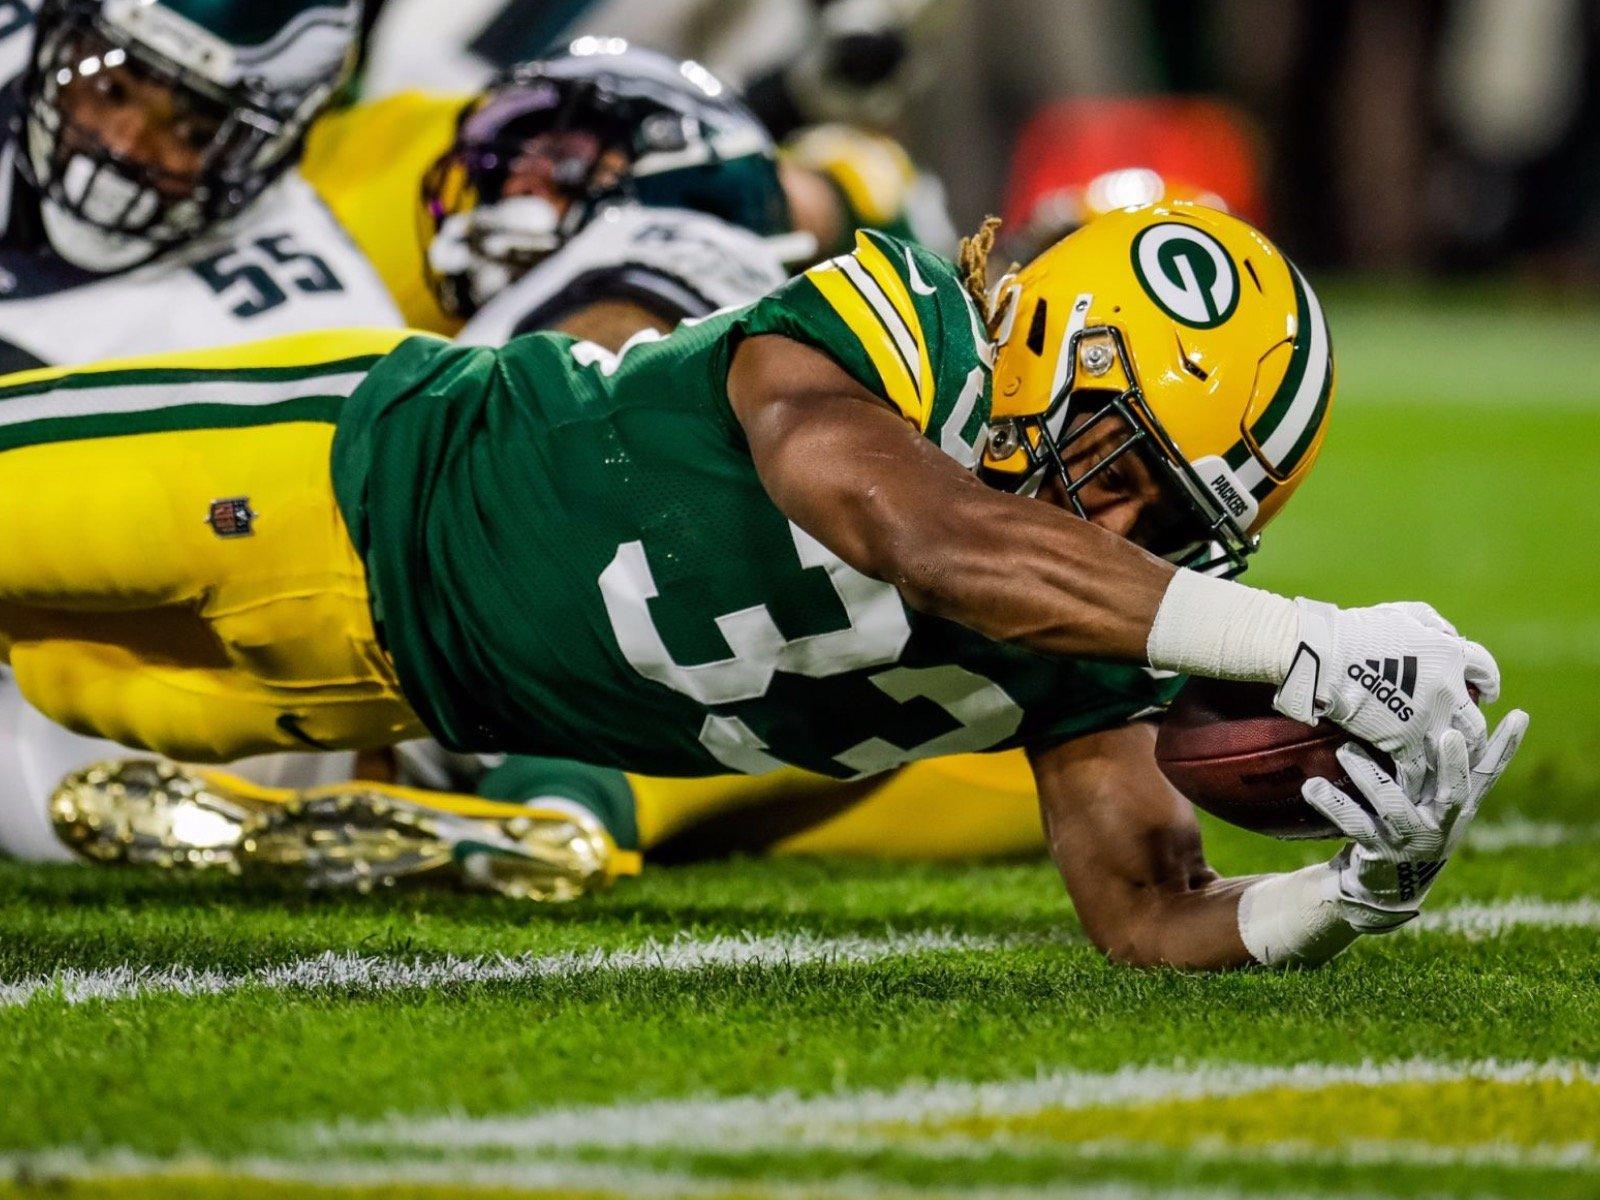 key image from the Packers' crummy first loss